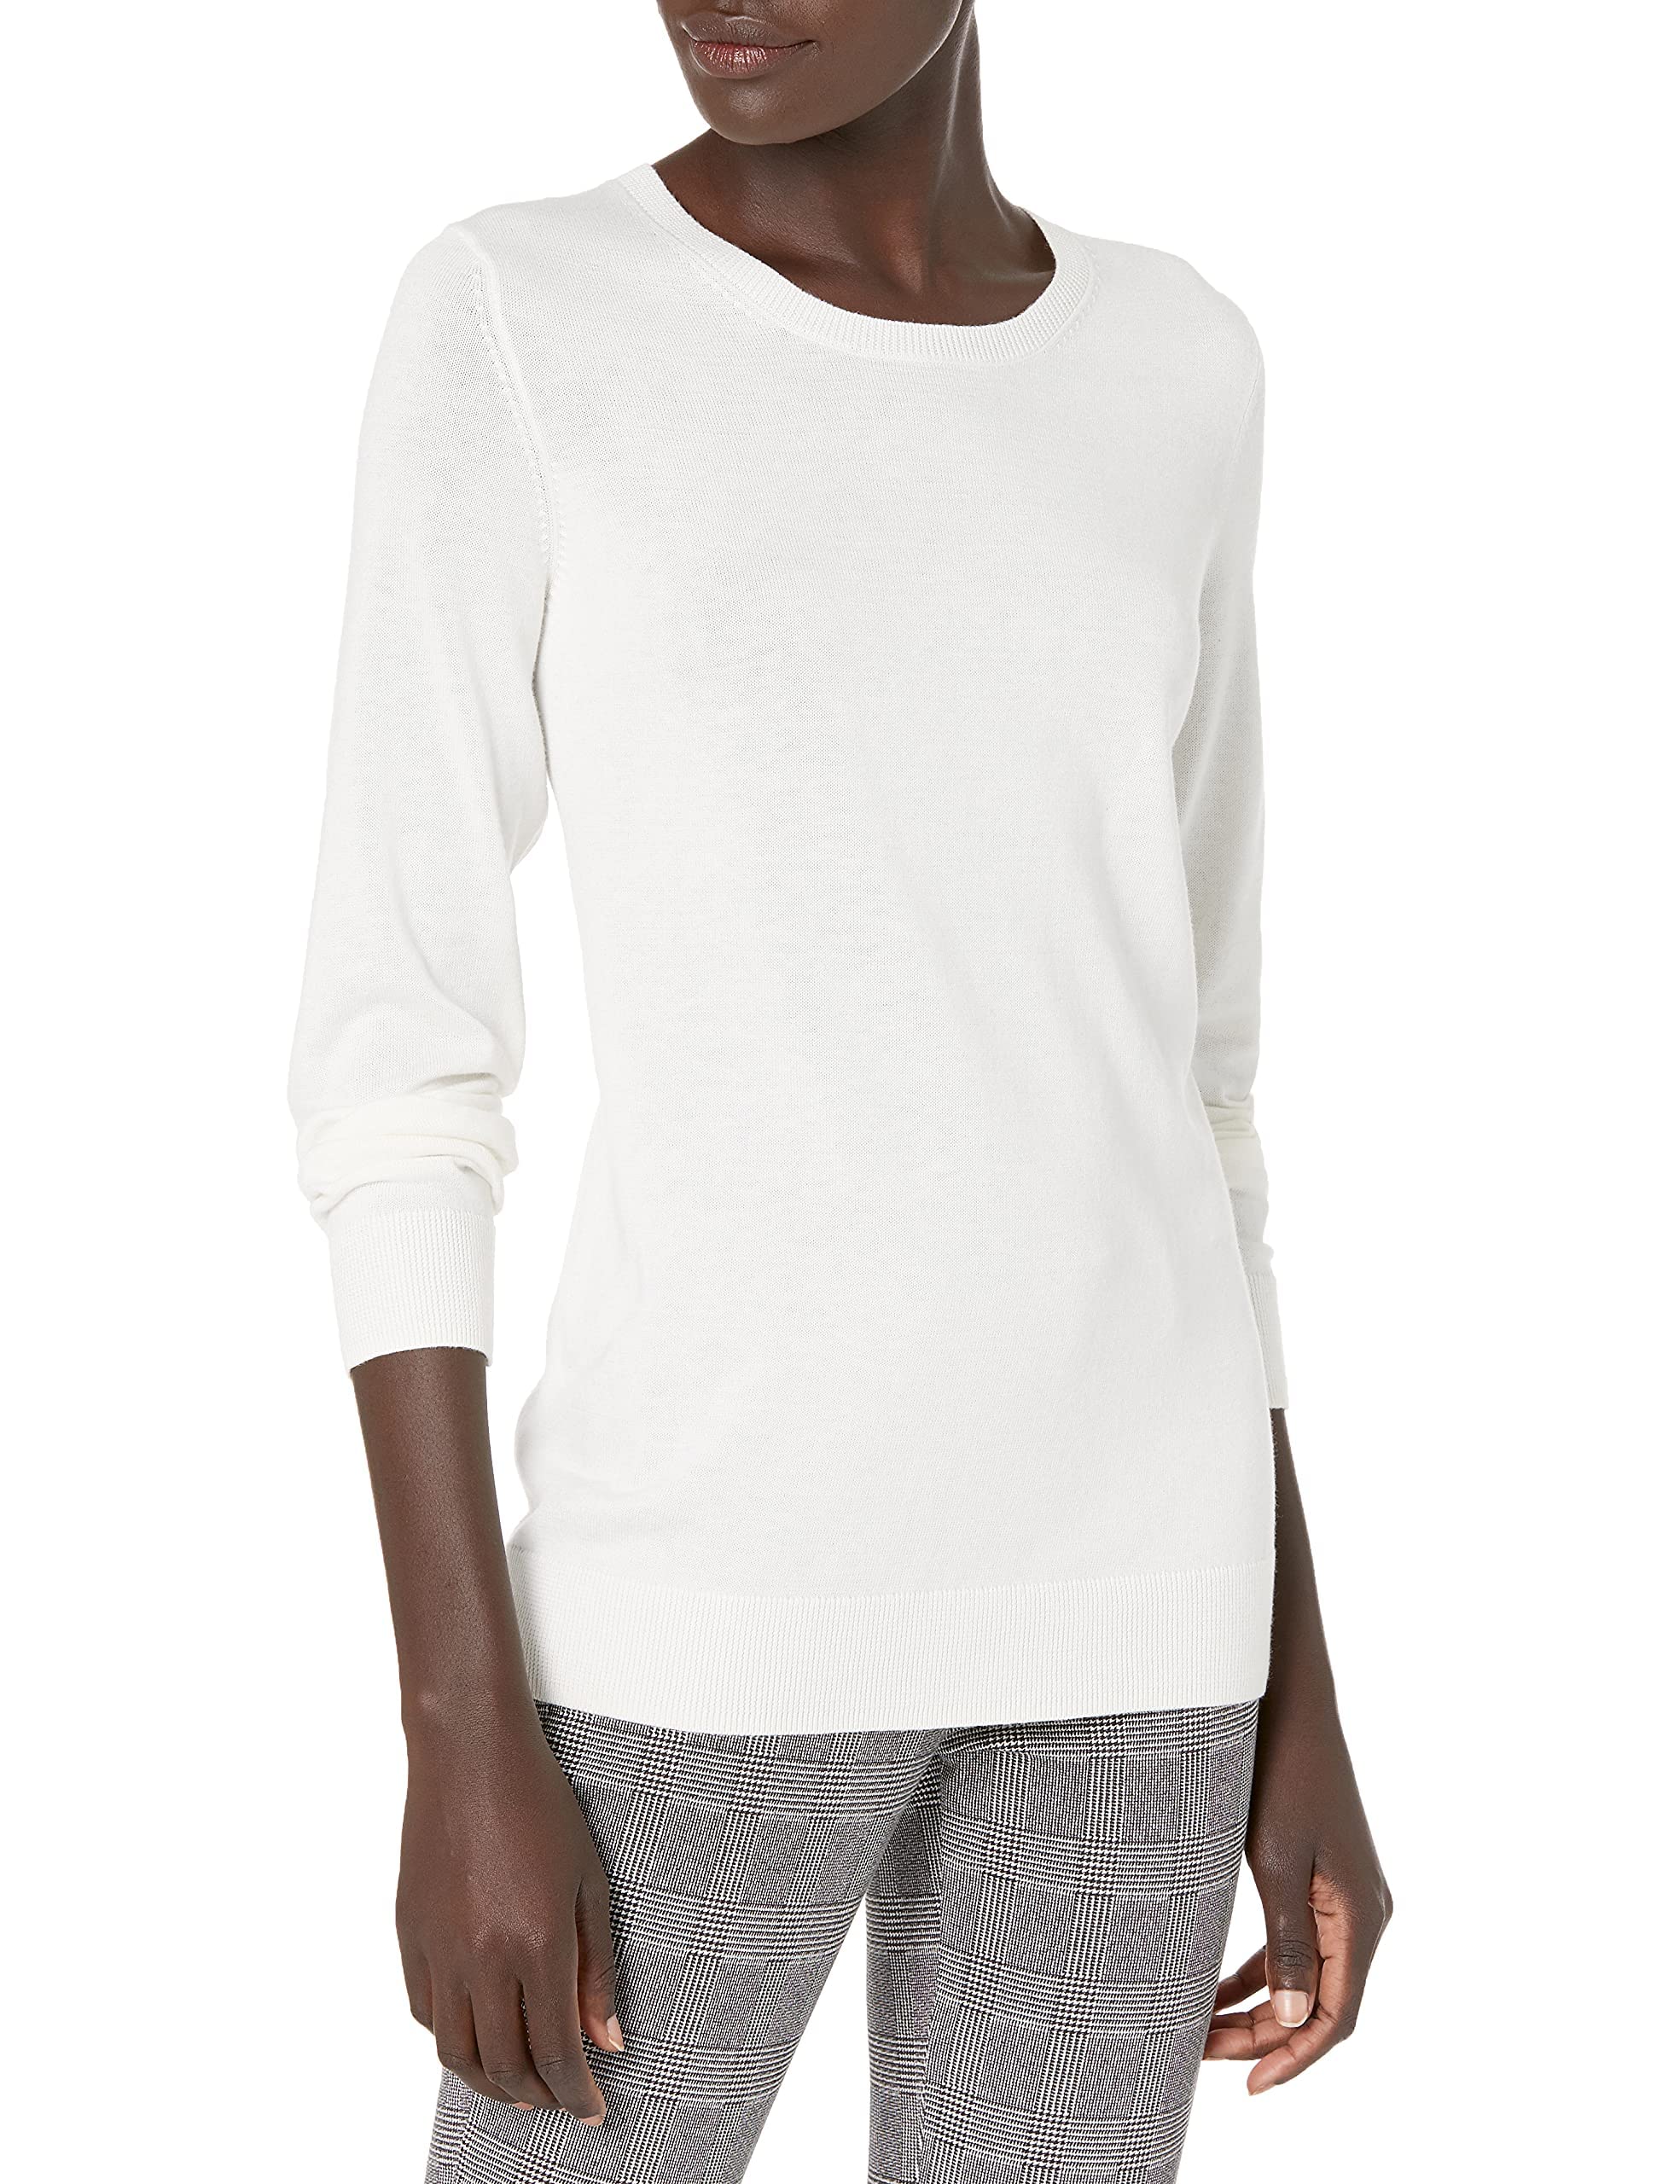 Amazon Essentials Women's Long-Sleeve Lightweight Crewneck Sweater (Available in Plus Size)